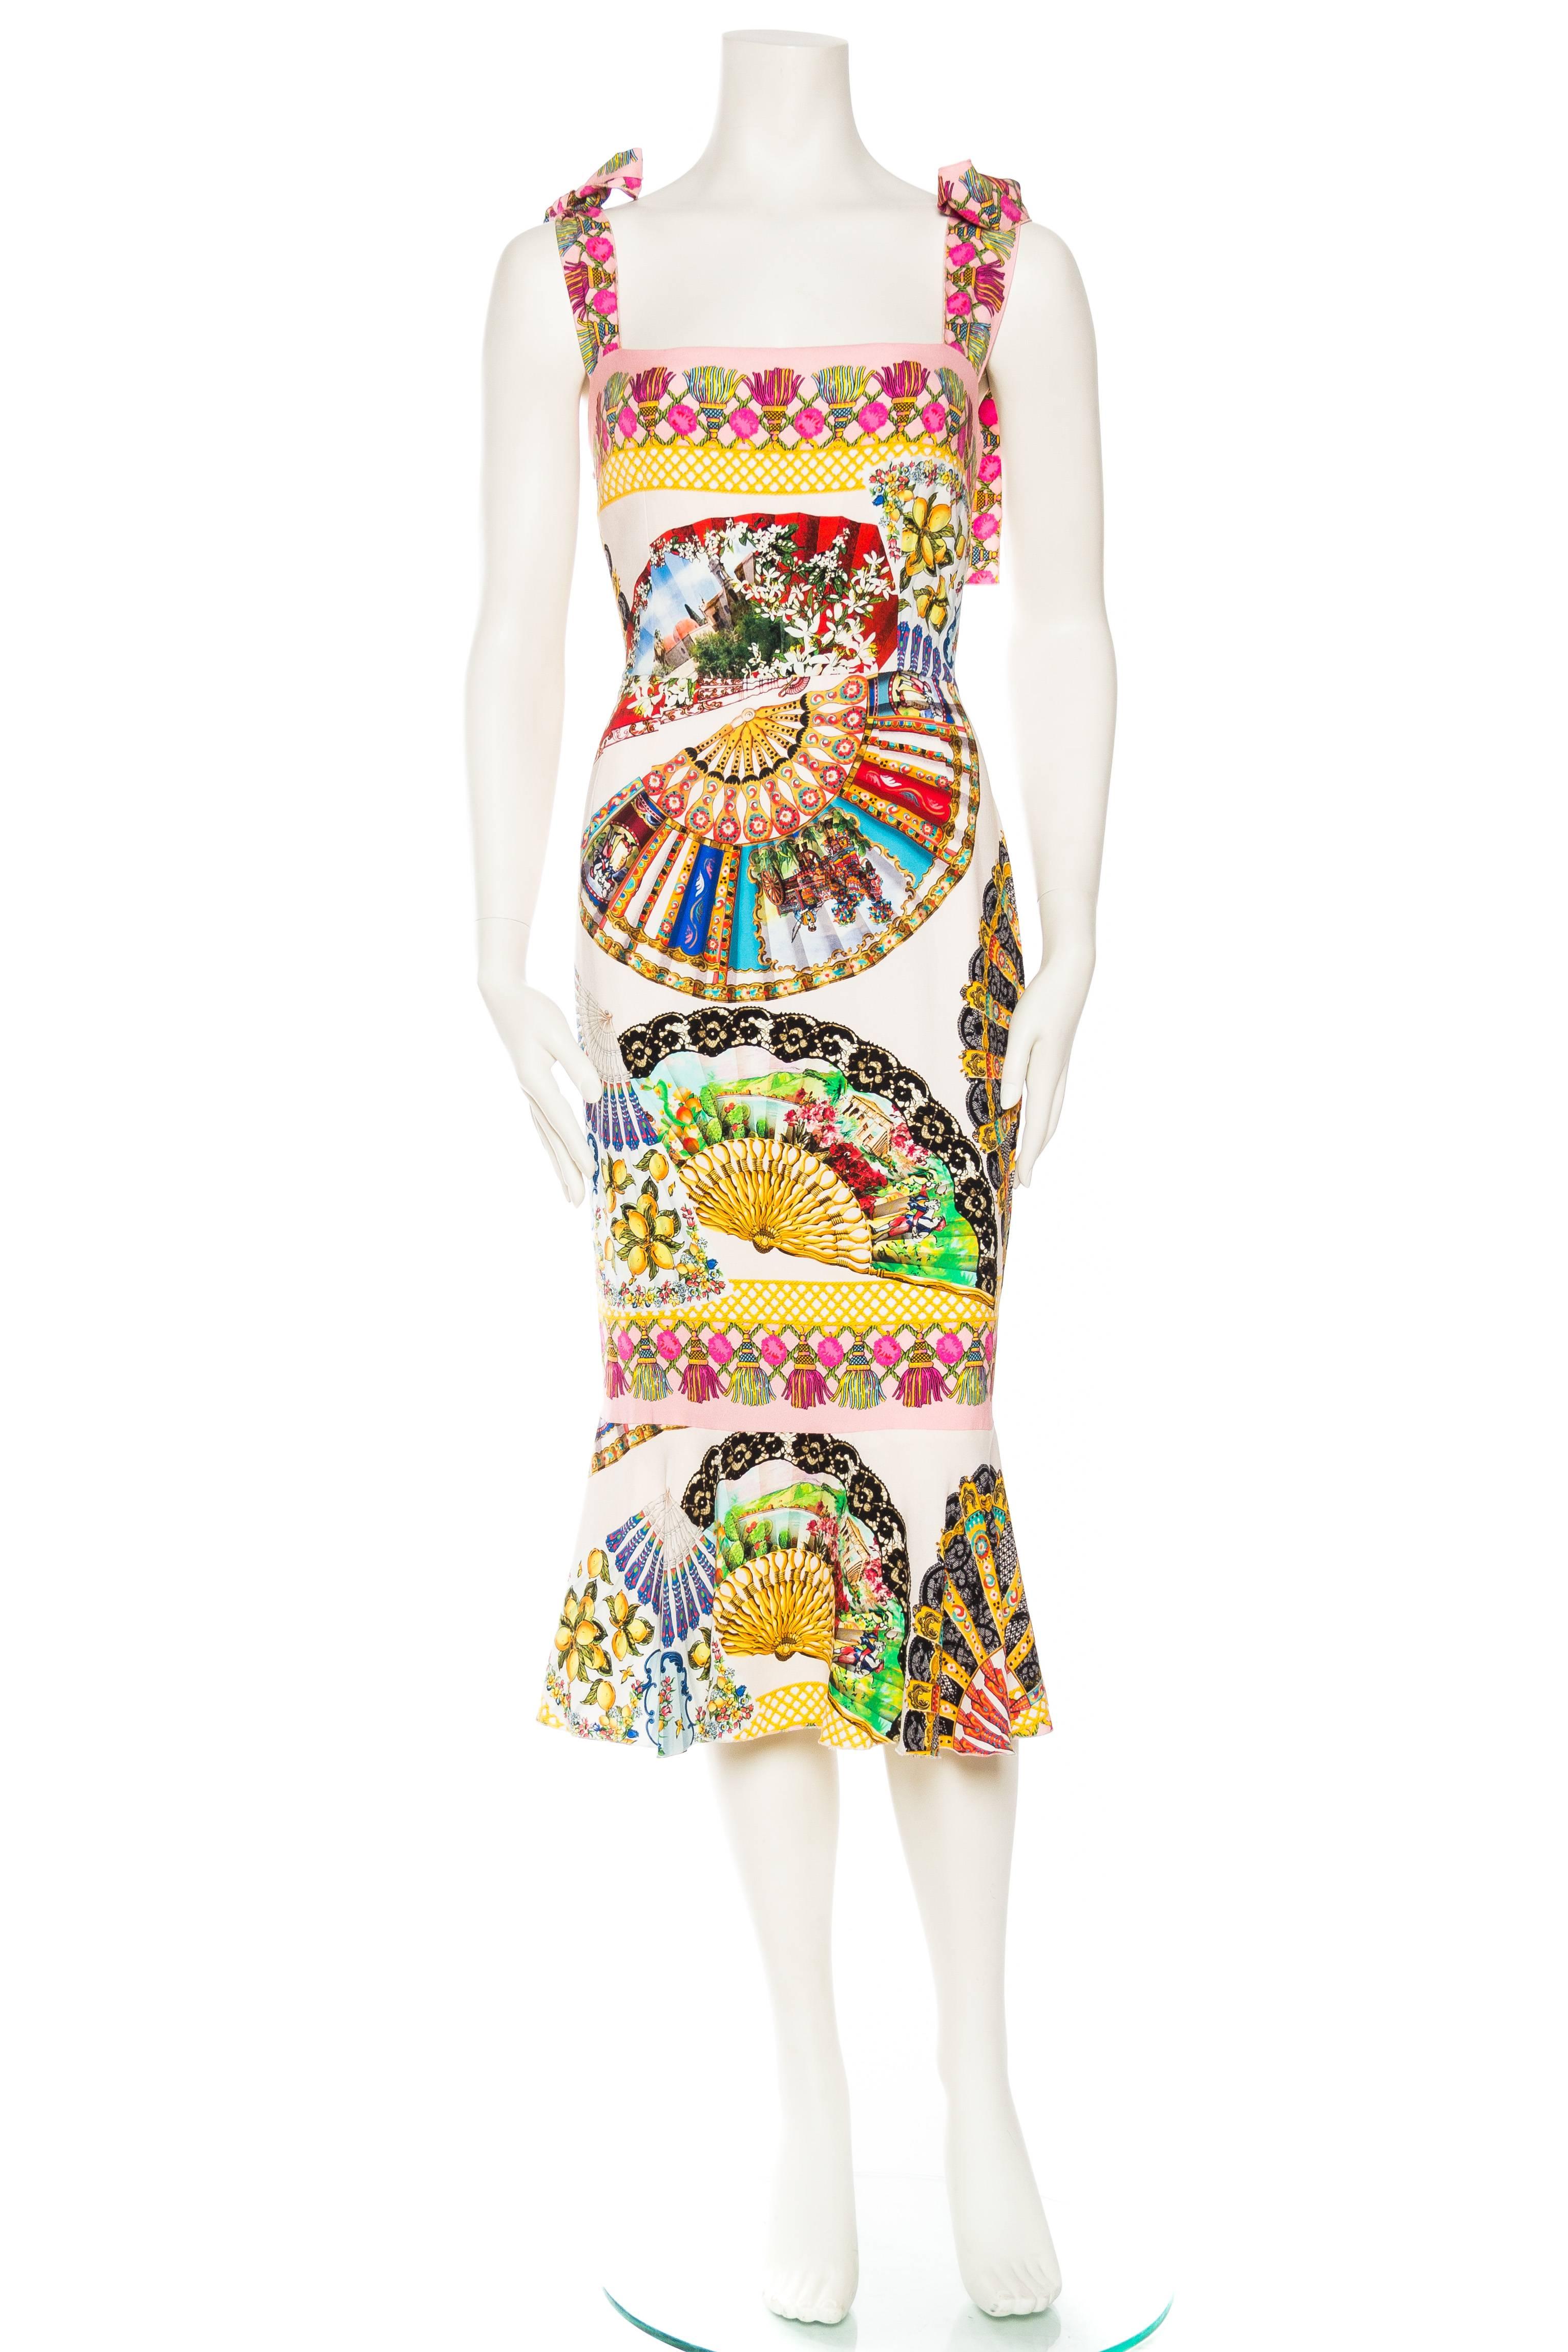 Dolce & Gabbana 1990s Fan Print Dress, dress is larger size and is clipped to fit our form, Stretch silk would look good on up to an American size 10. 